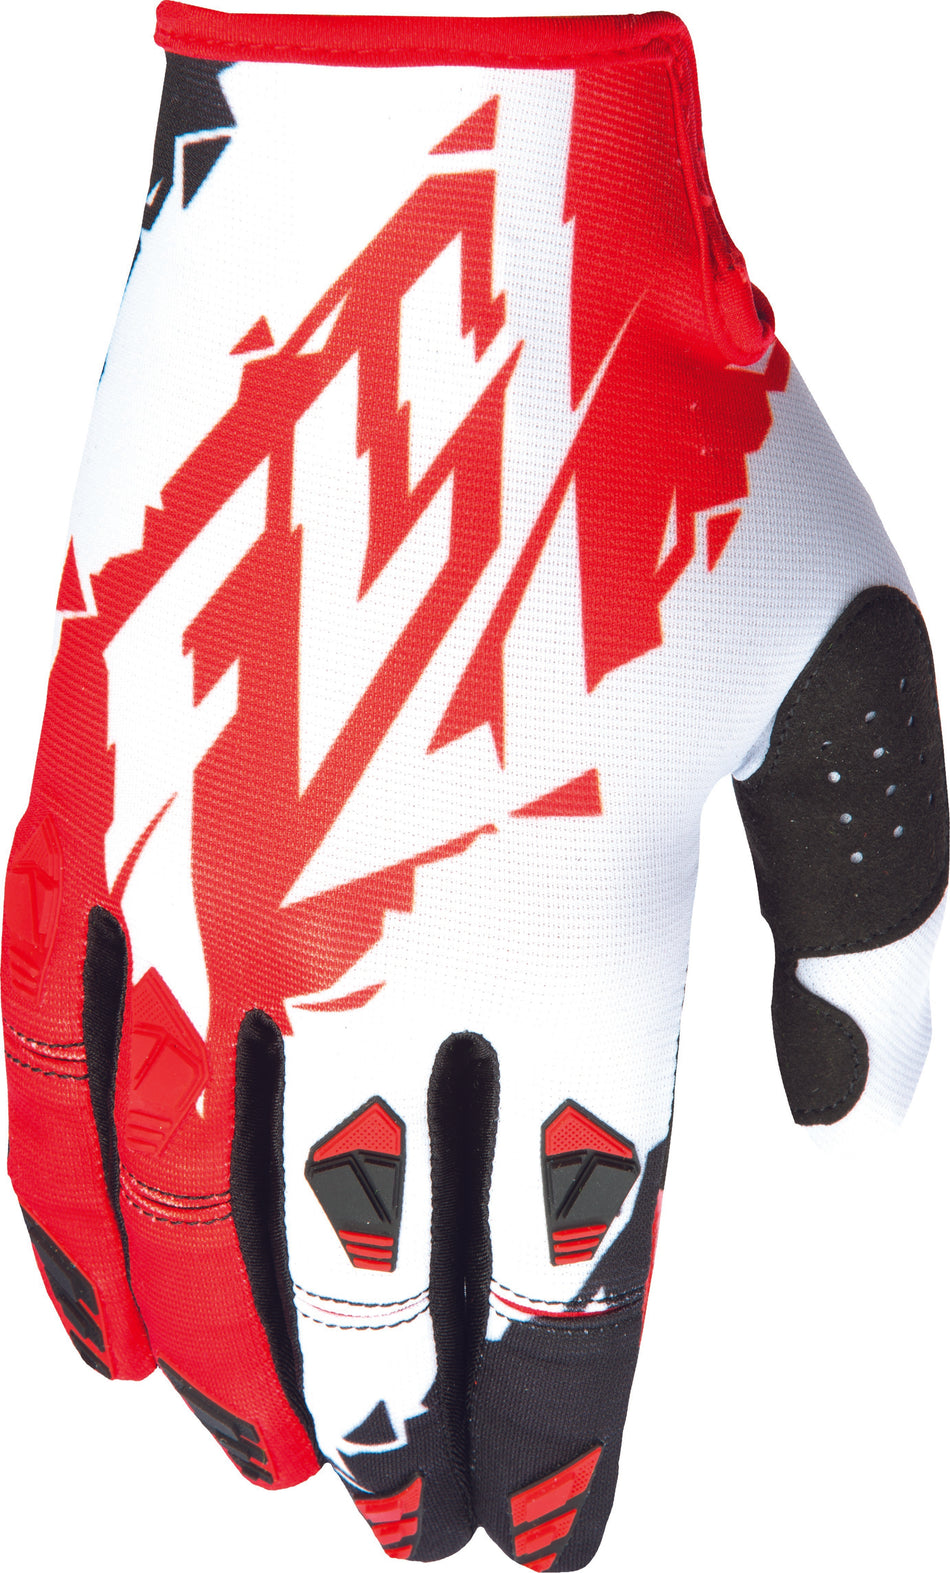 FLY RACING Kinetic Glove Red/White Sz 7 Xs 370-41407